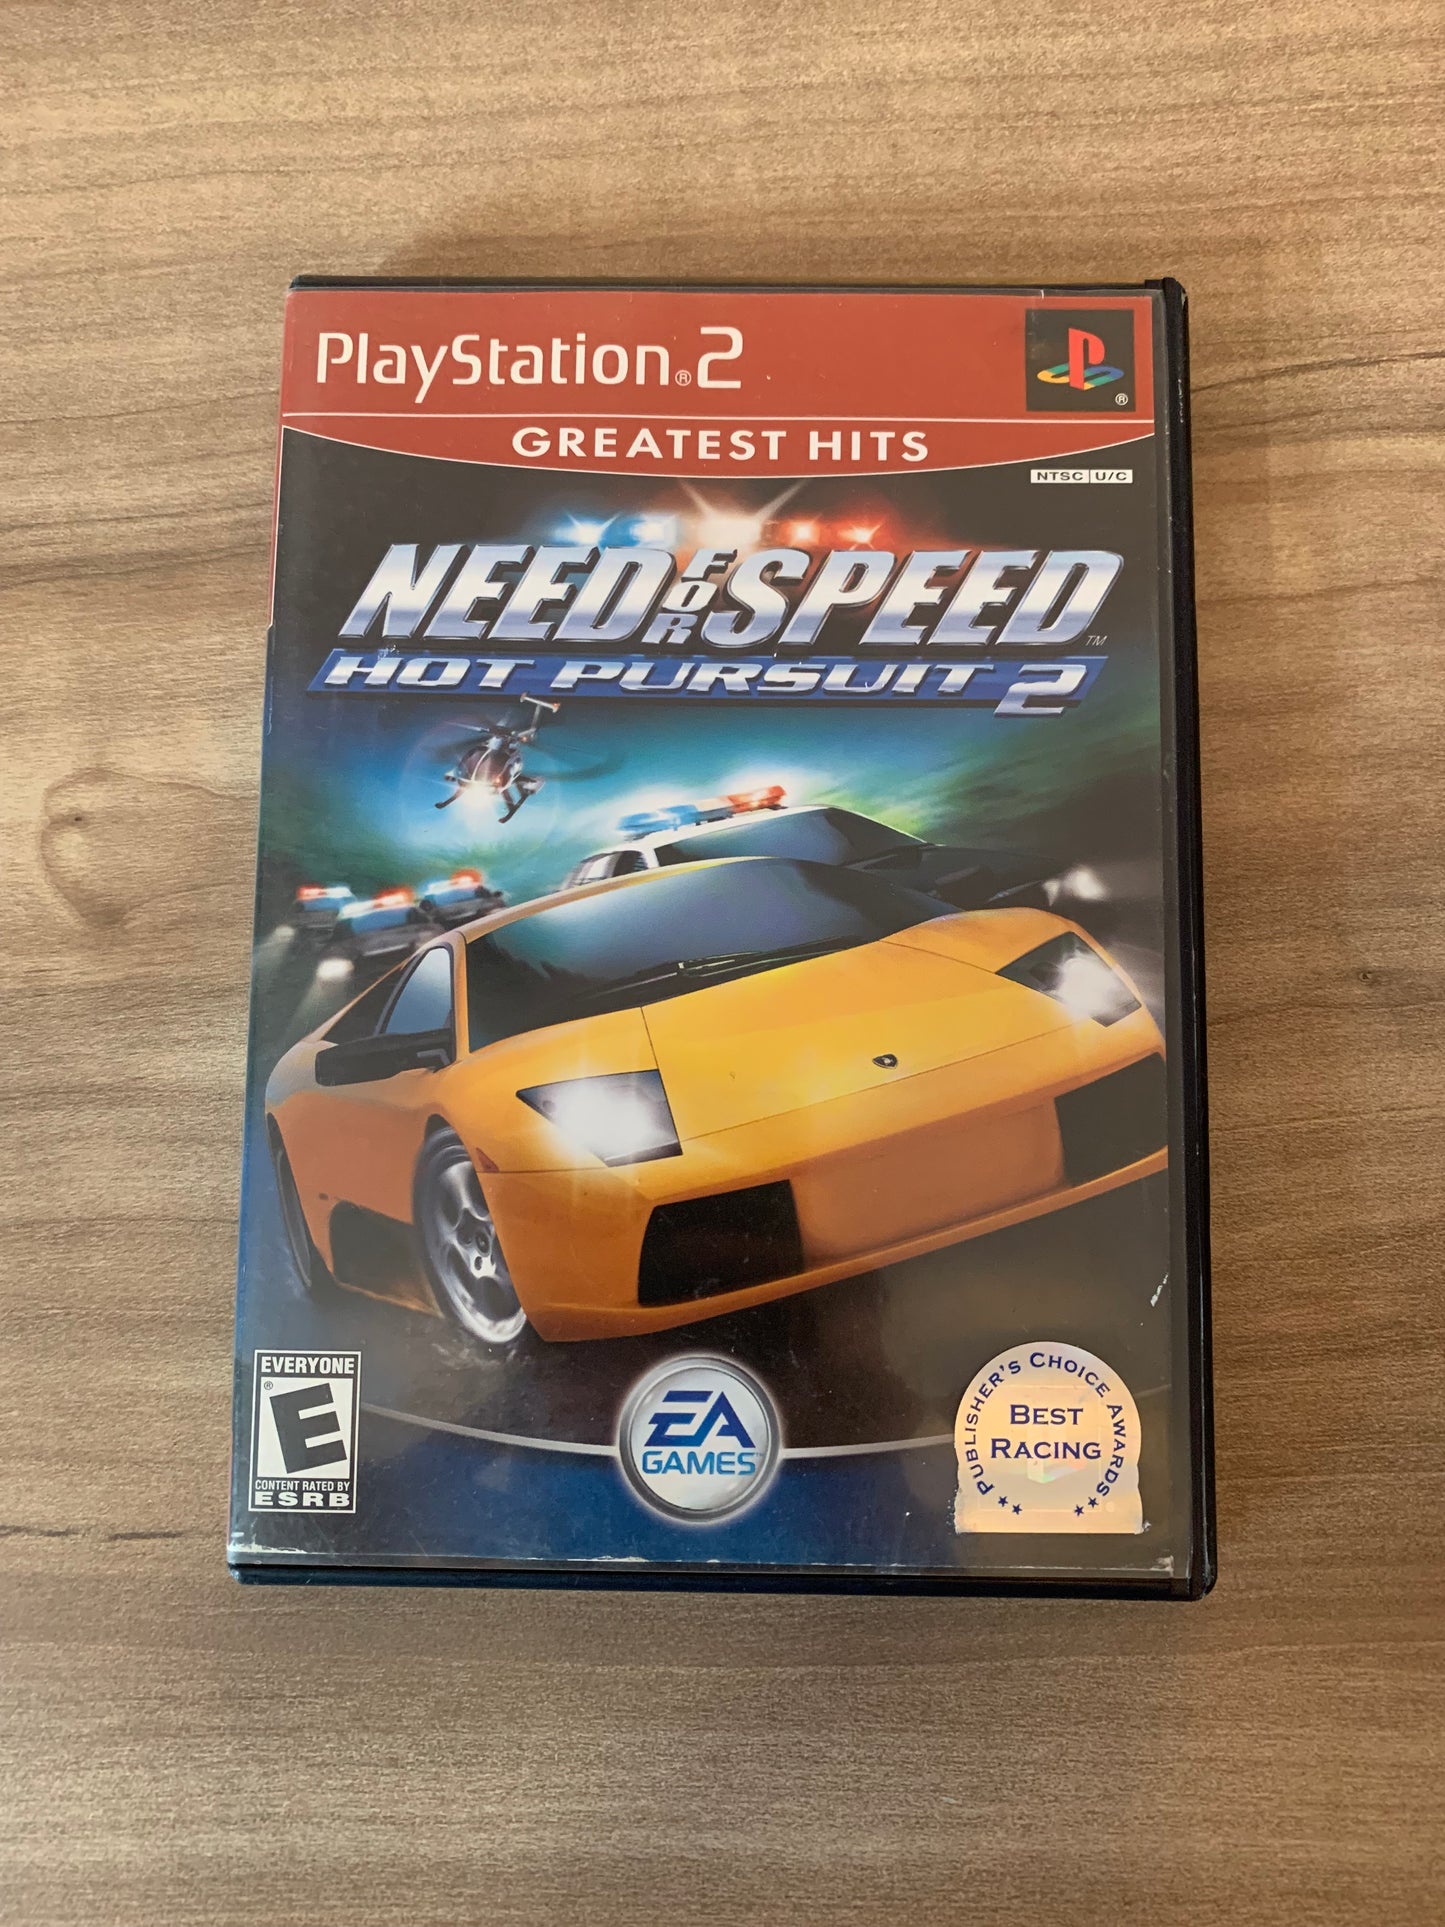 SONY PLAYSTATiON 2 [PS2] | NEED FOR SPEED HOT PURSUiT 2 | GREATEST HiTS